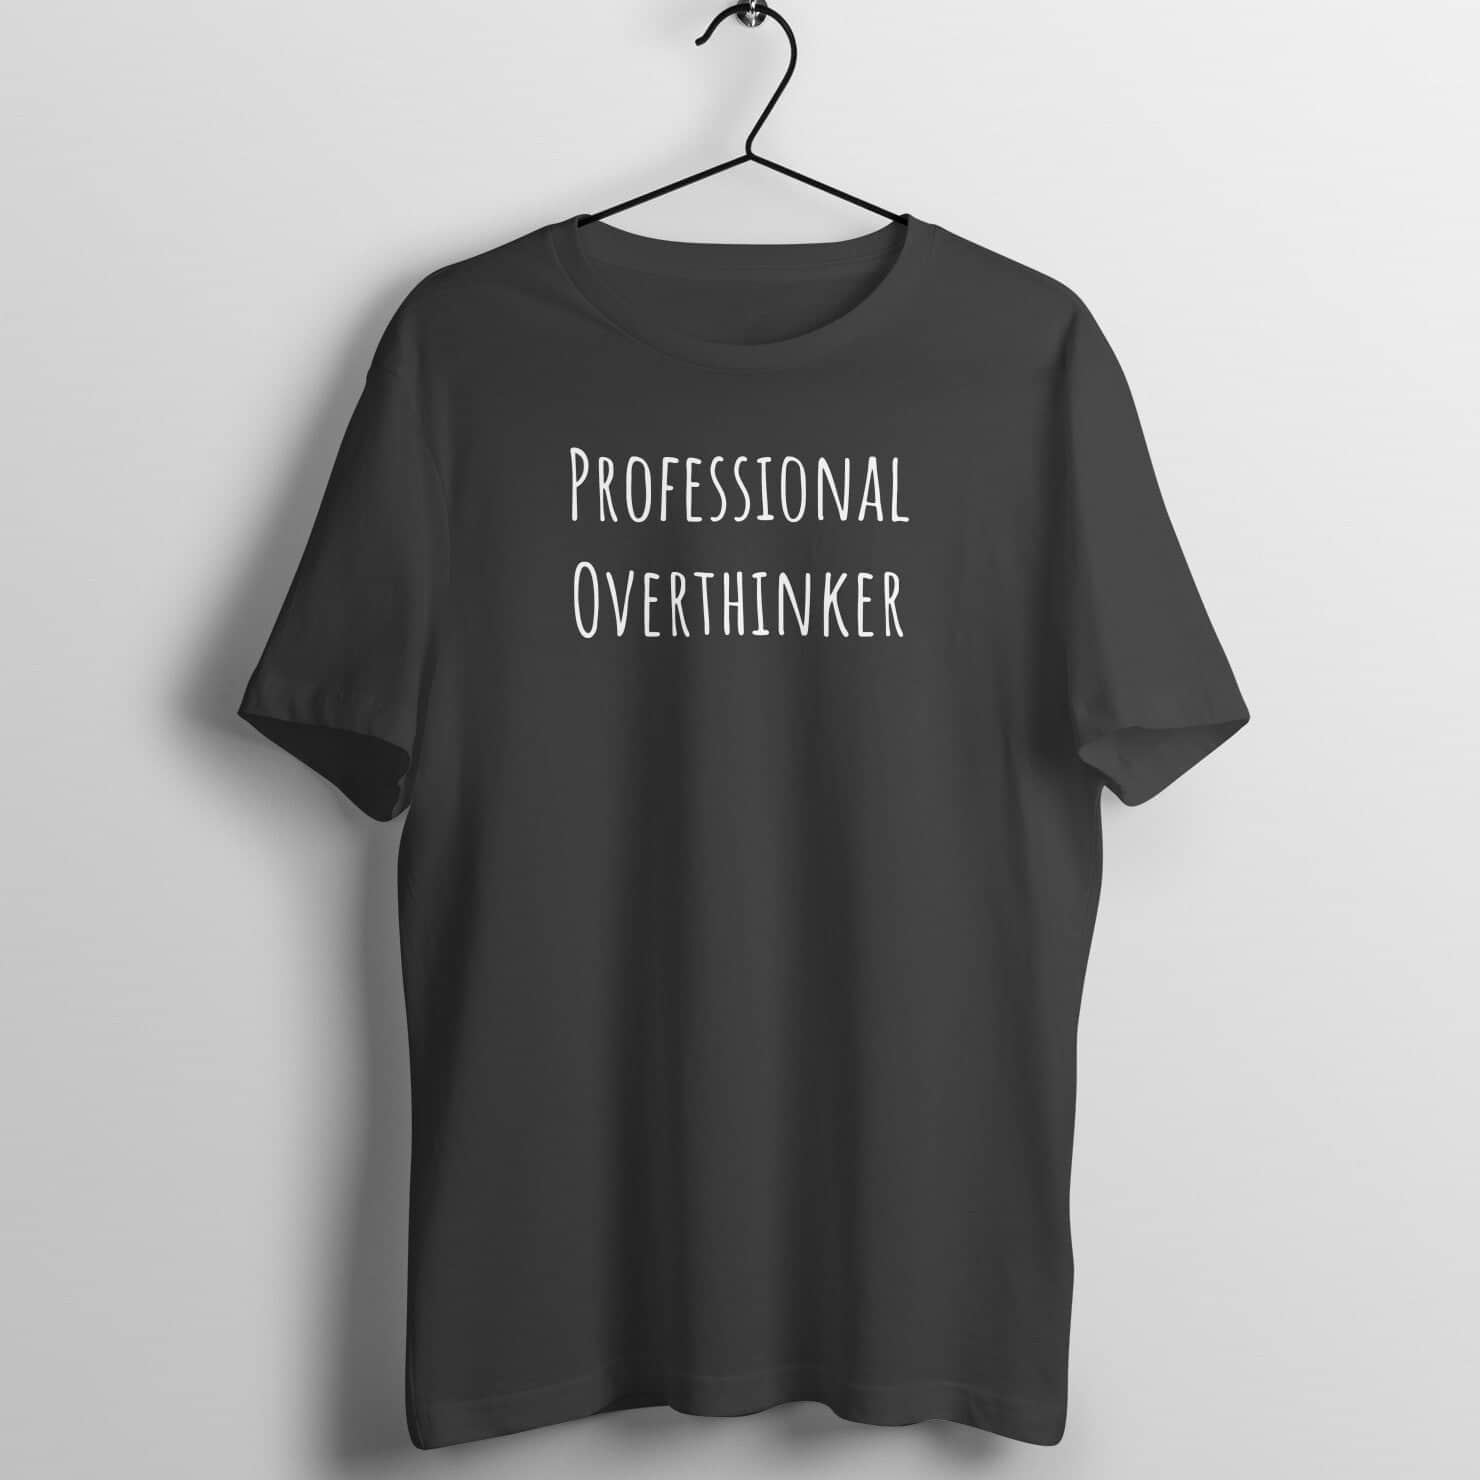 Professional Overthinker Funny Black T Shirt for Men and Women freeshipping - Catch My Drift India